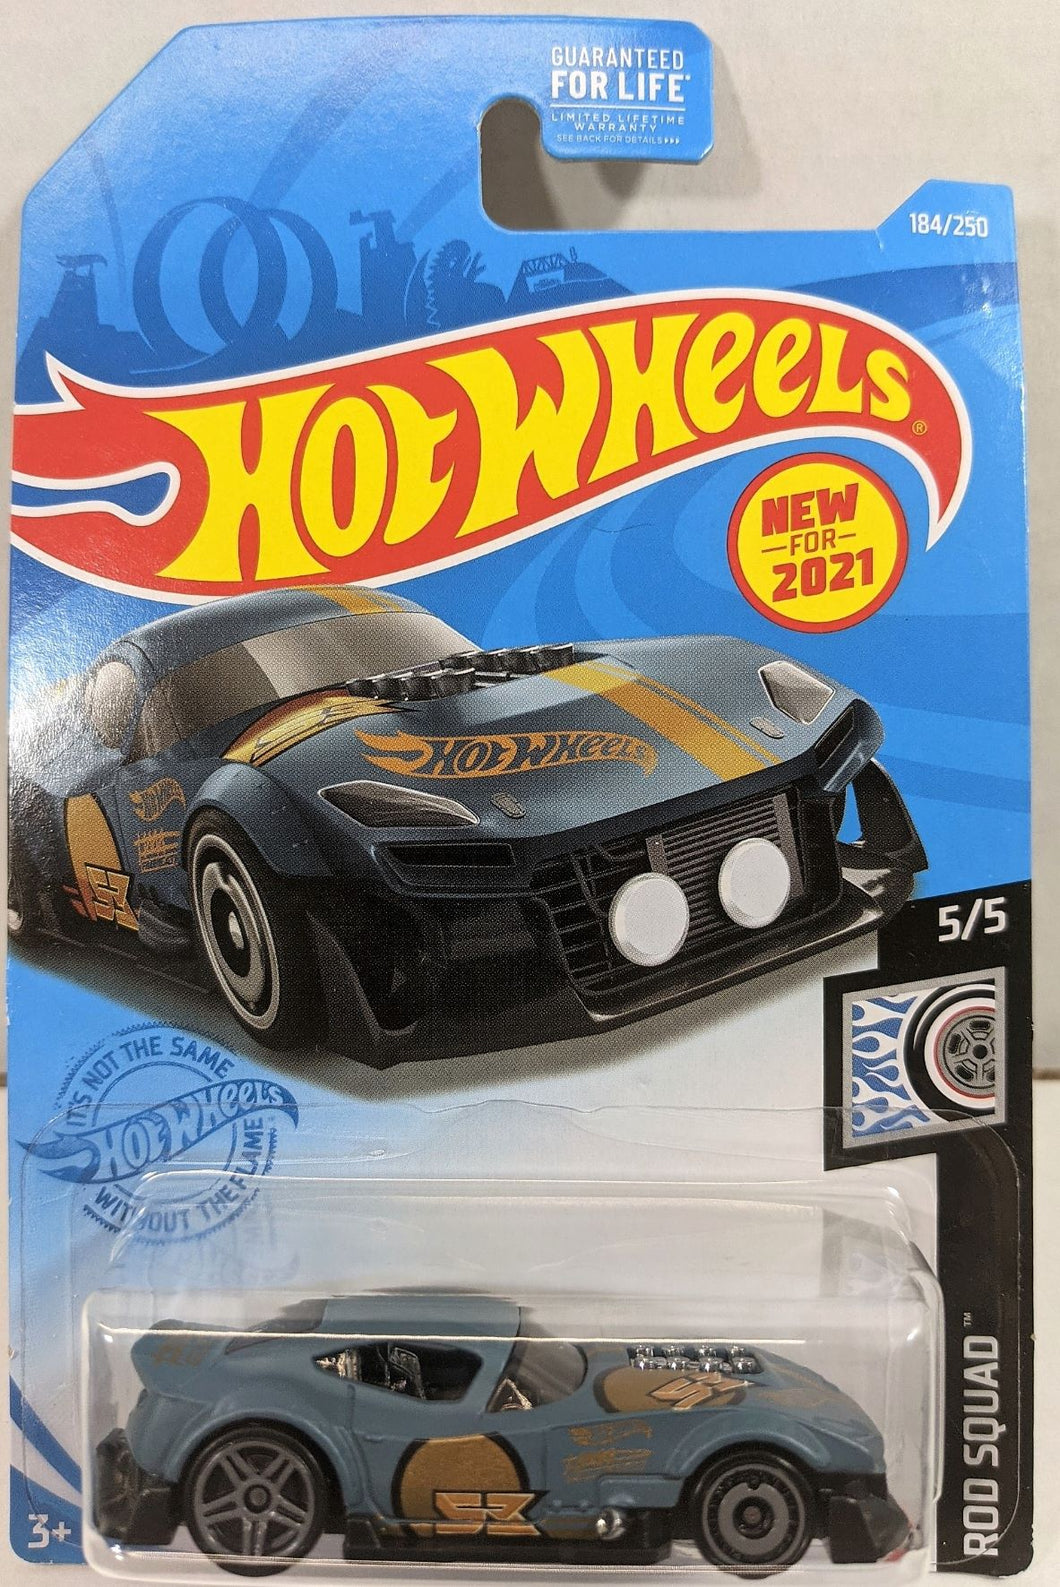 Hot Wheels Muscle and Blown